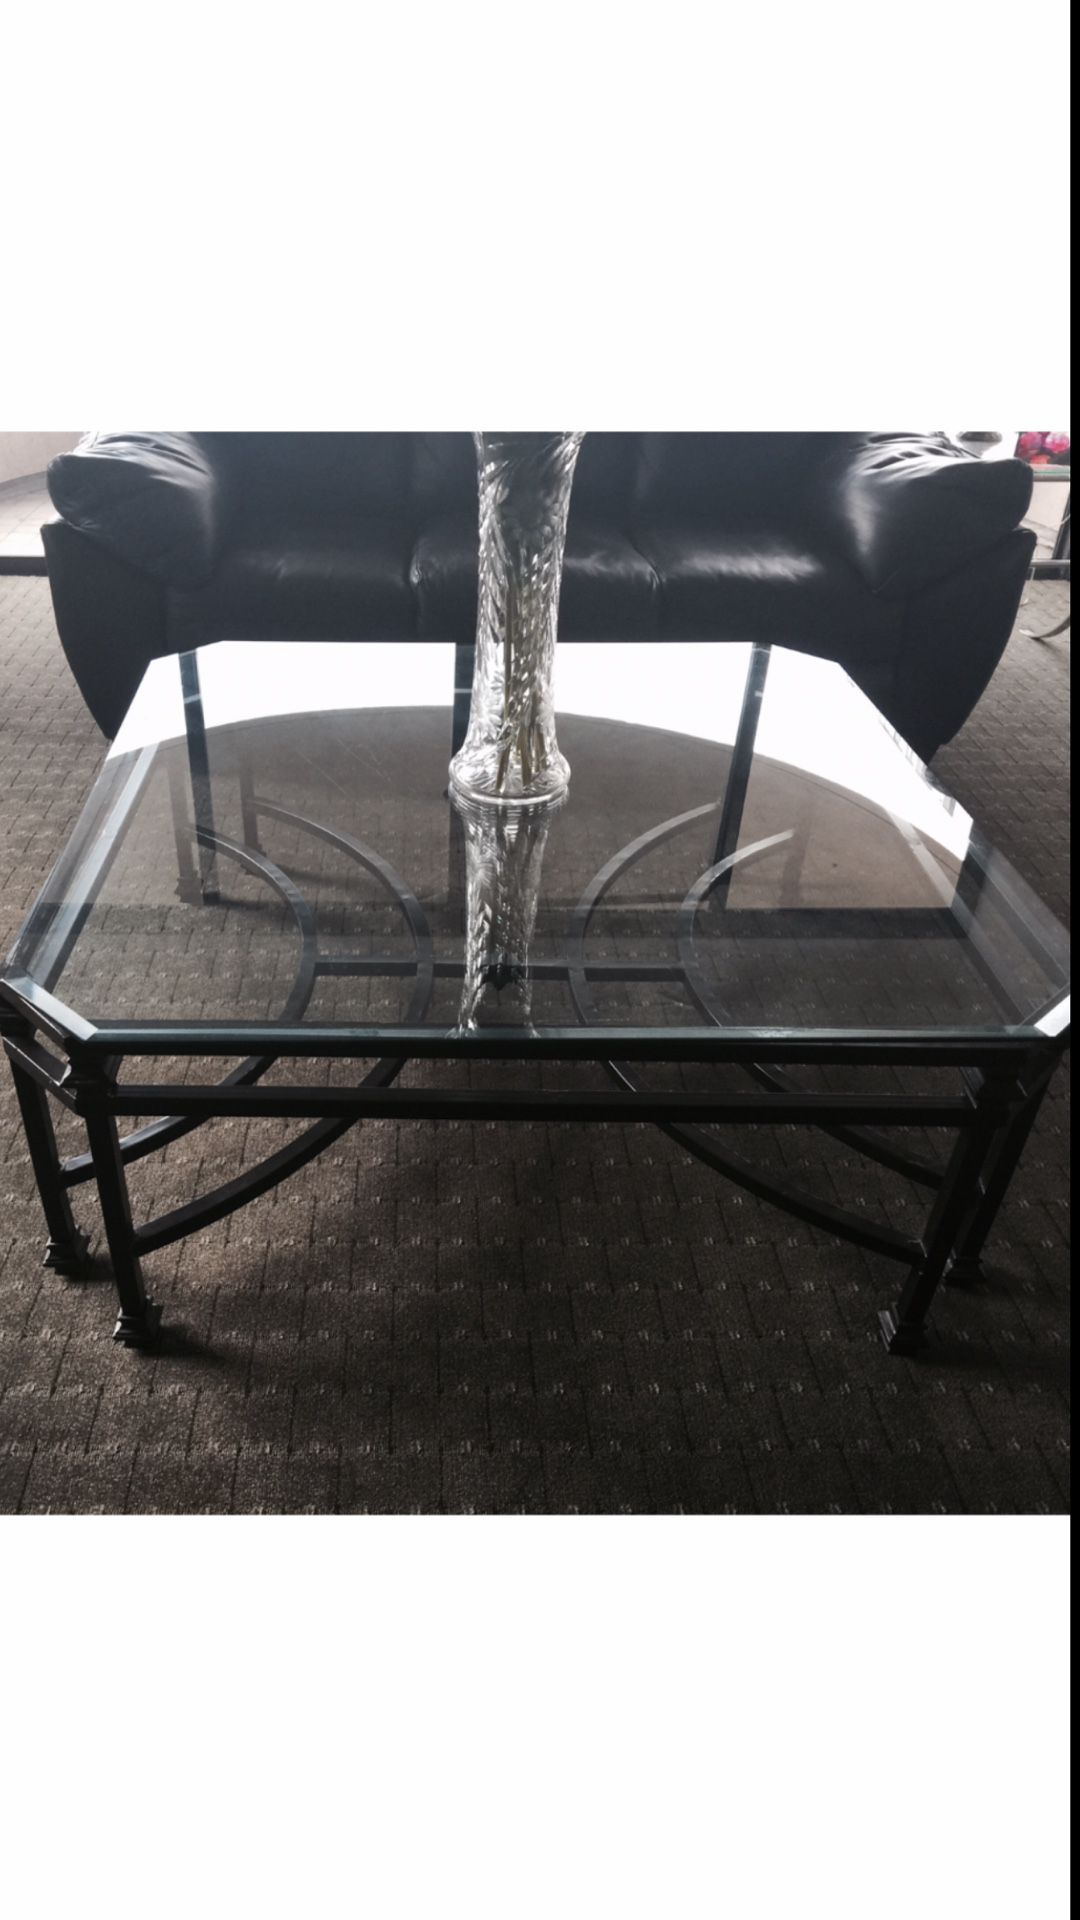 Black Wrought Iron Coffee table with glass top. Small crack in corner